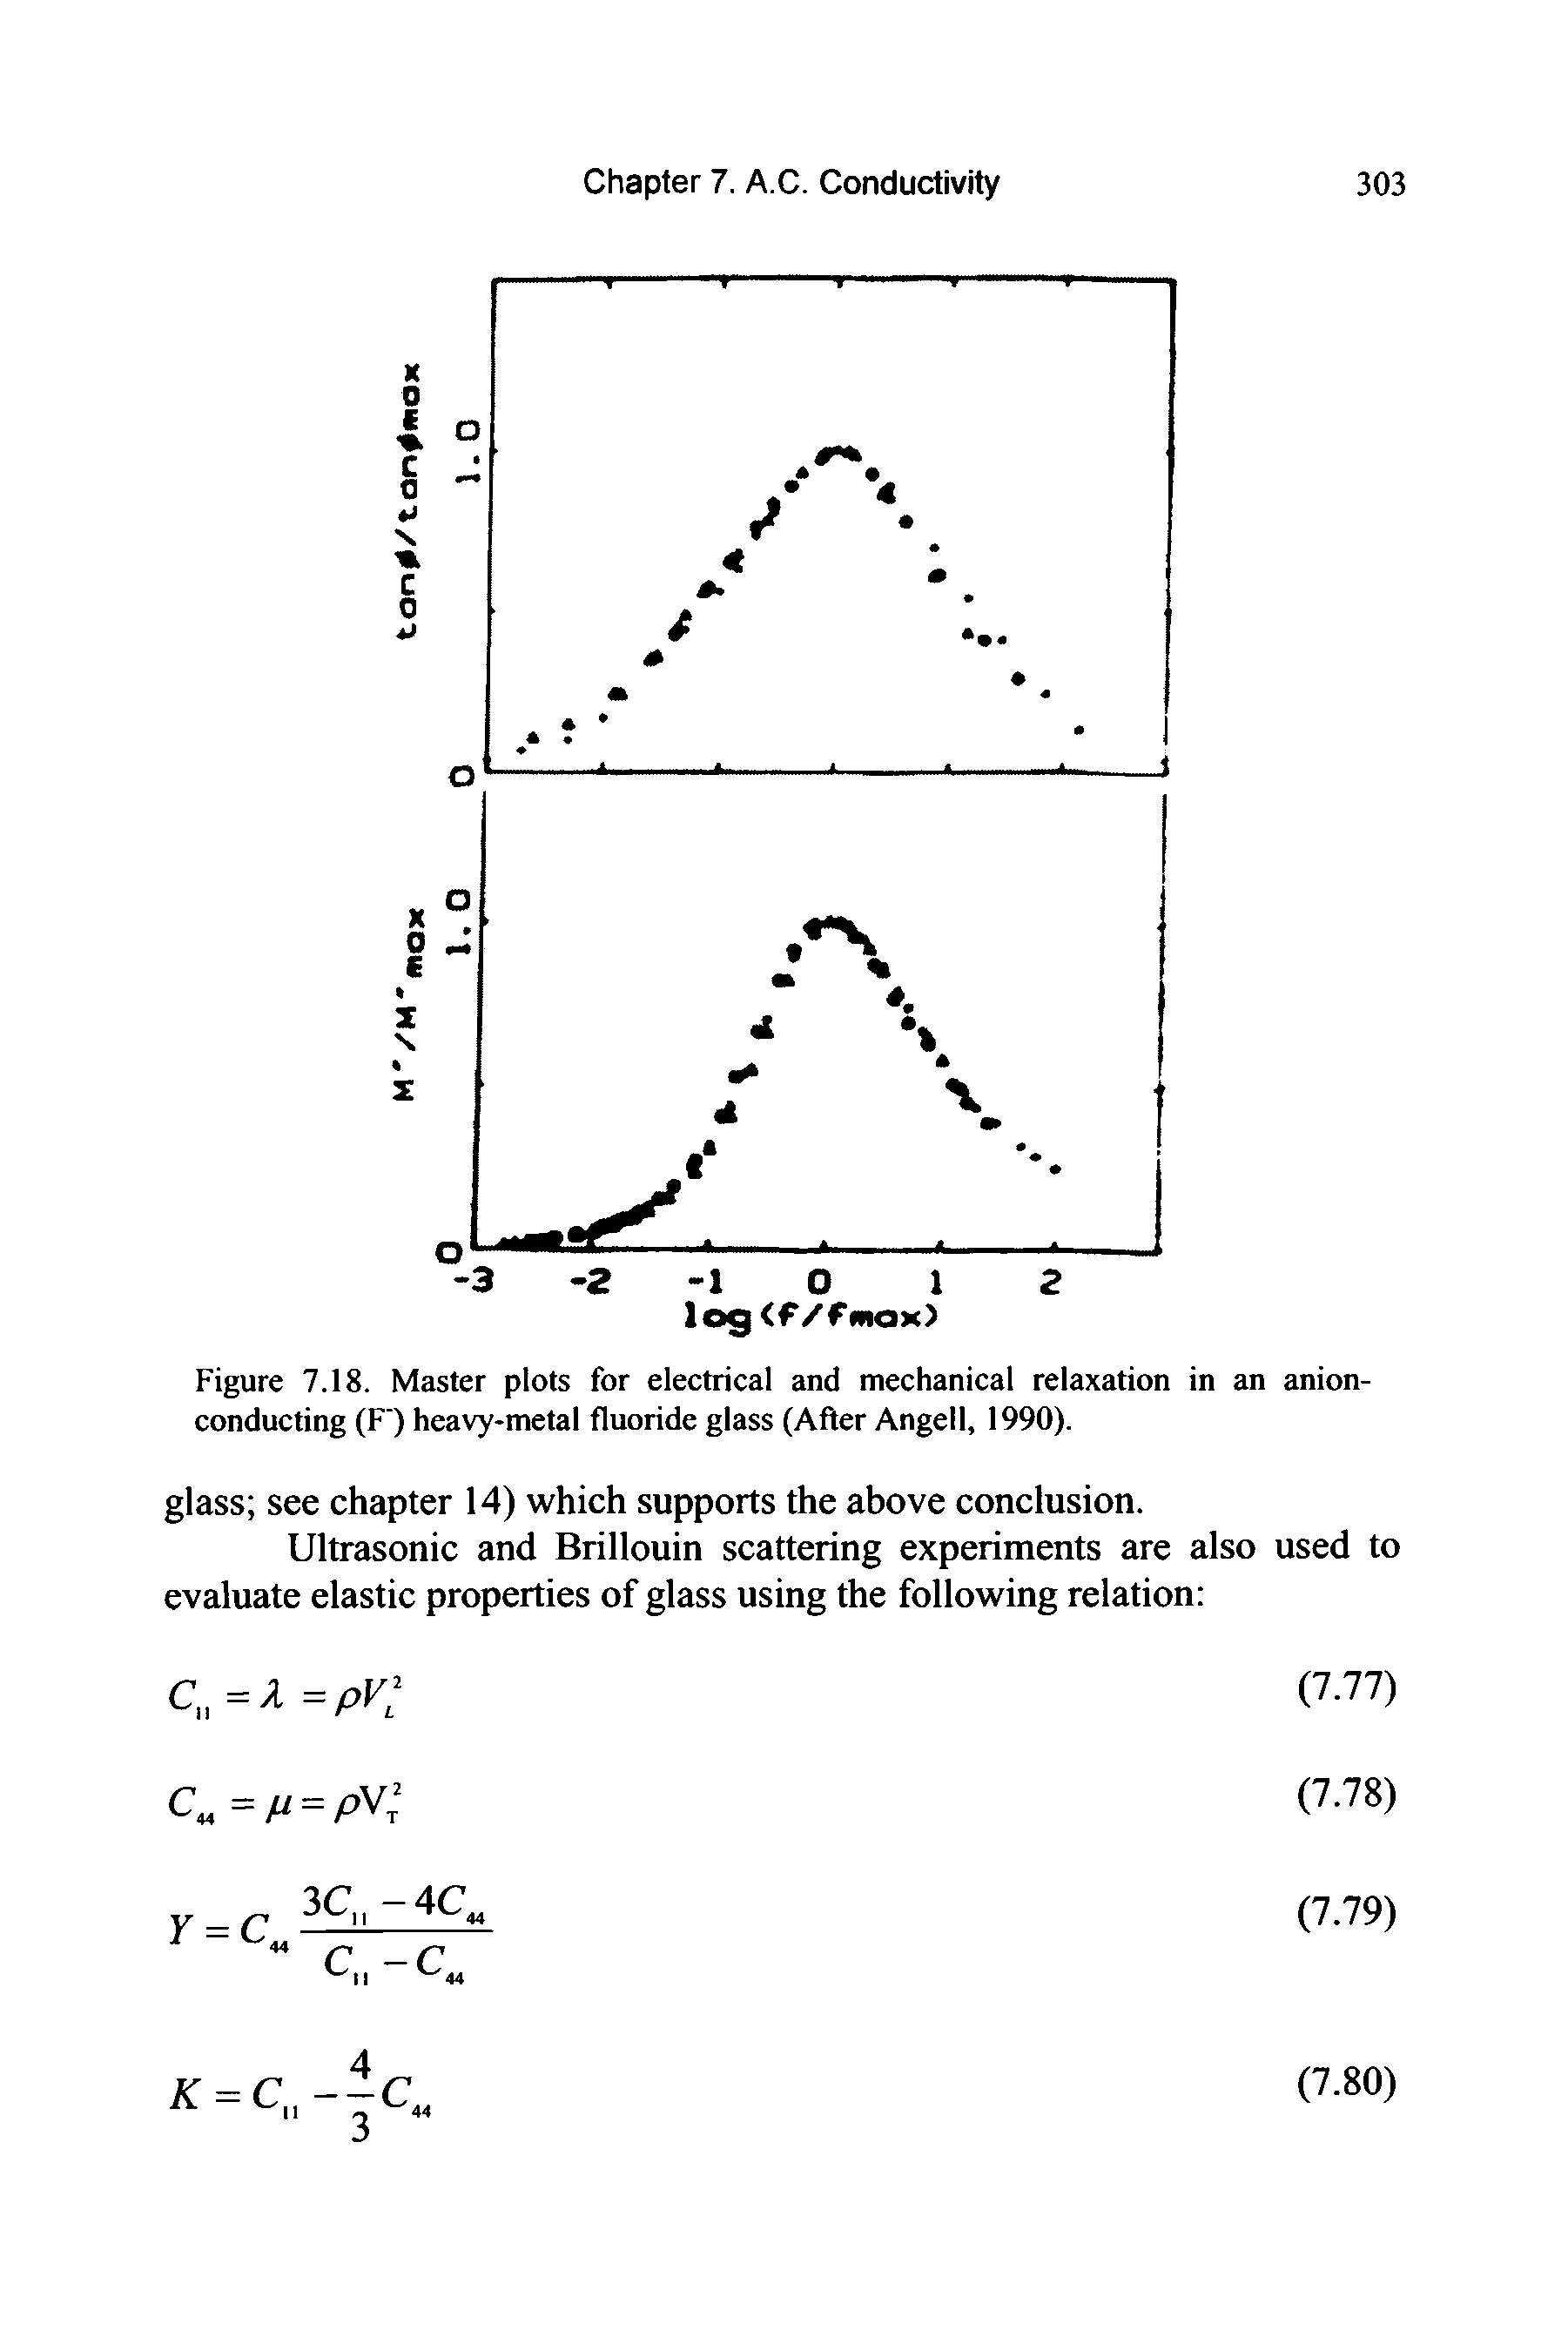 Figure 7.18. Master plots for electrical and mechanical relaxation in an anionconducting (F ) heavy-metal fluoride glass (After Angel1, 1990).